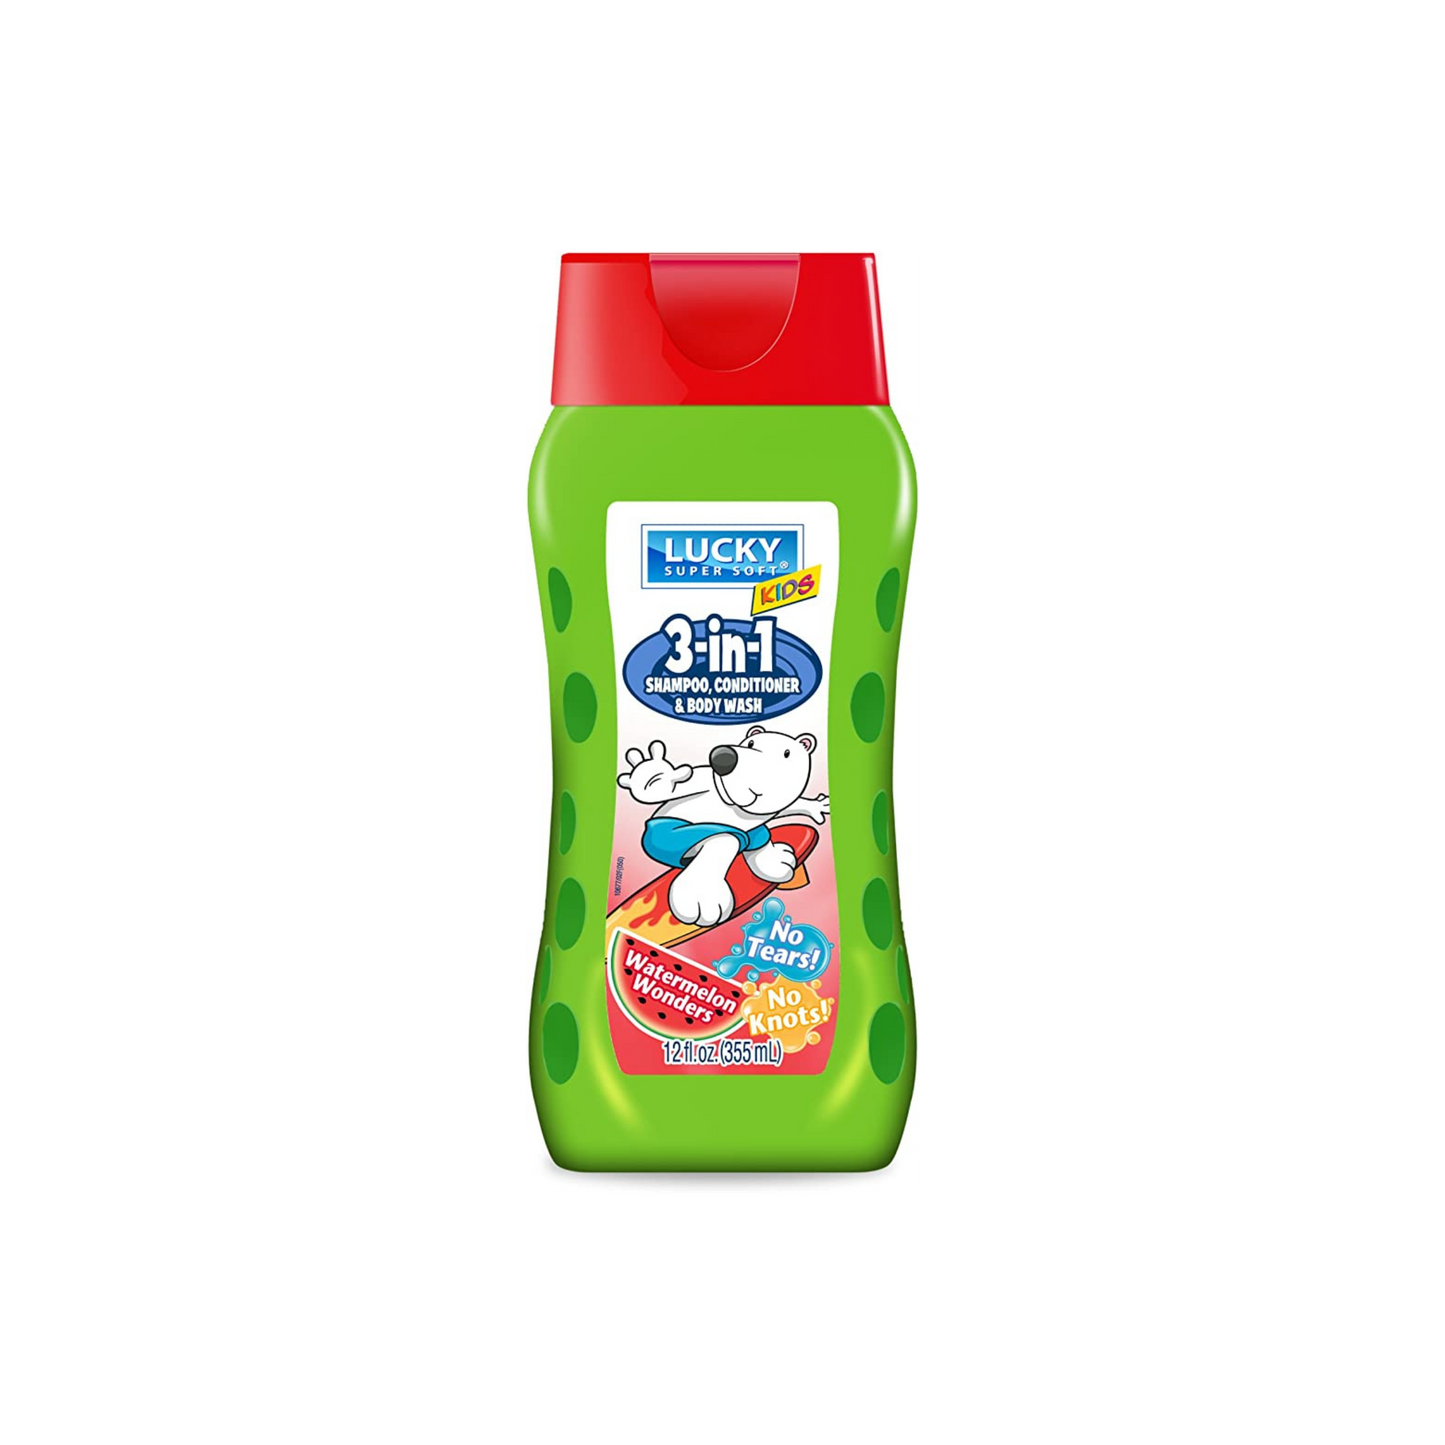 Lucky Super Soft Kids 3 In 1 Shampoo with Detangle Conditioner Body Wash, Watermelon Wonders, 12 Ounce